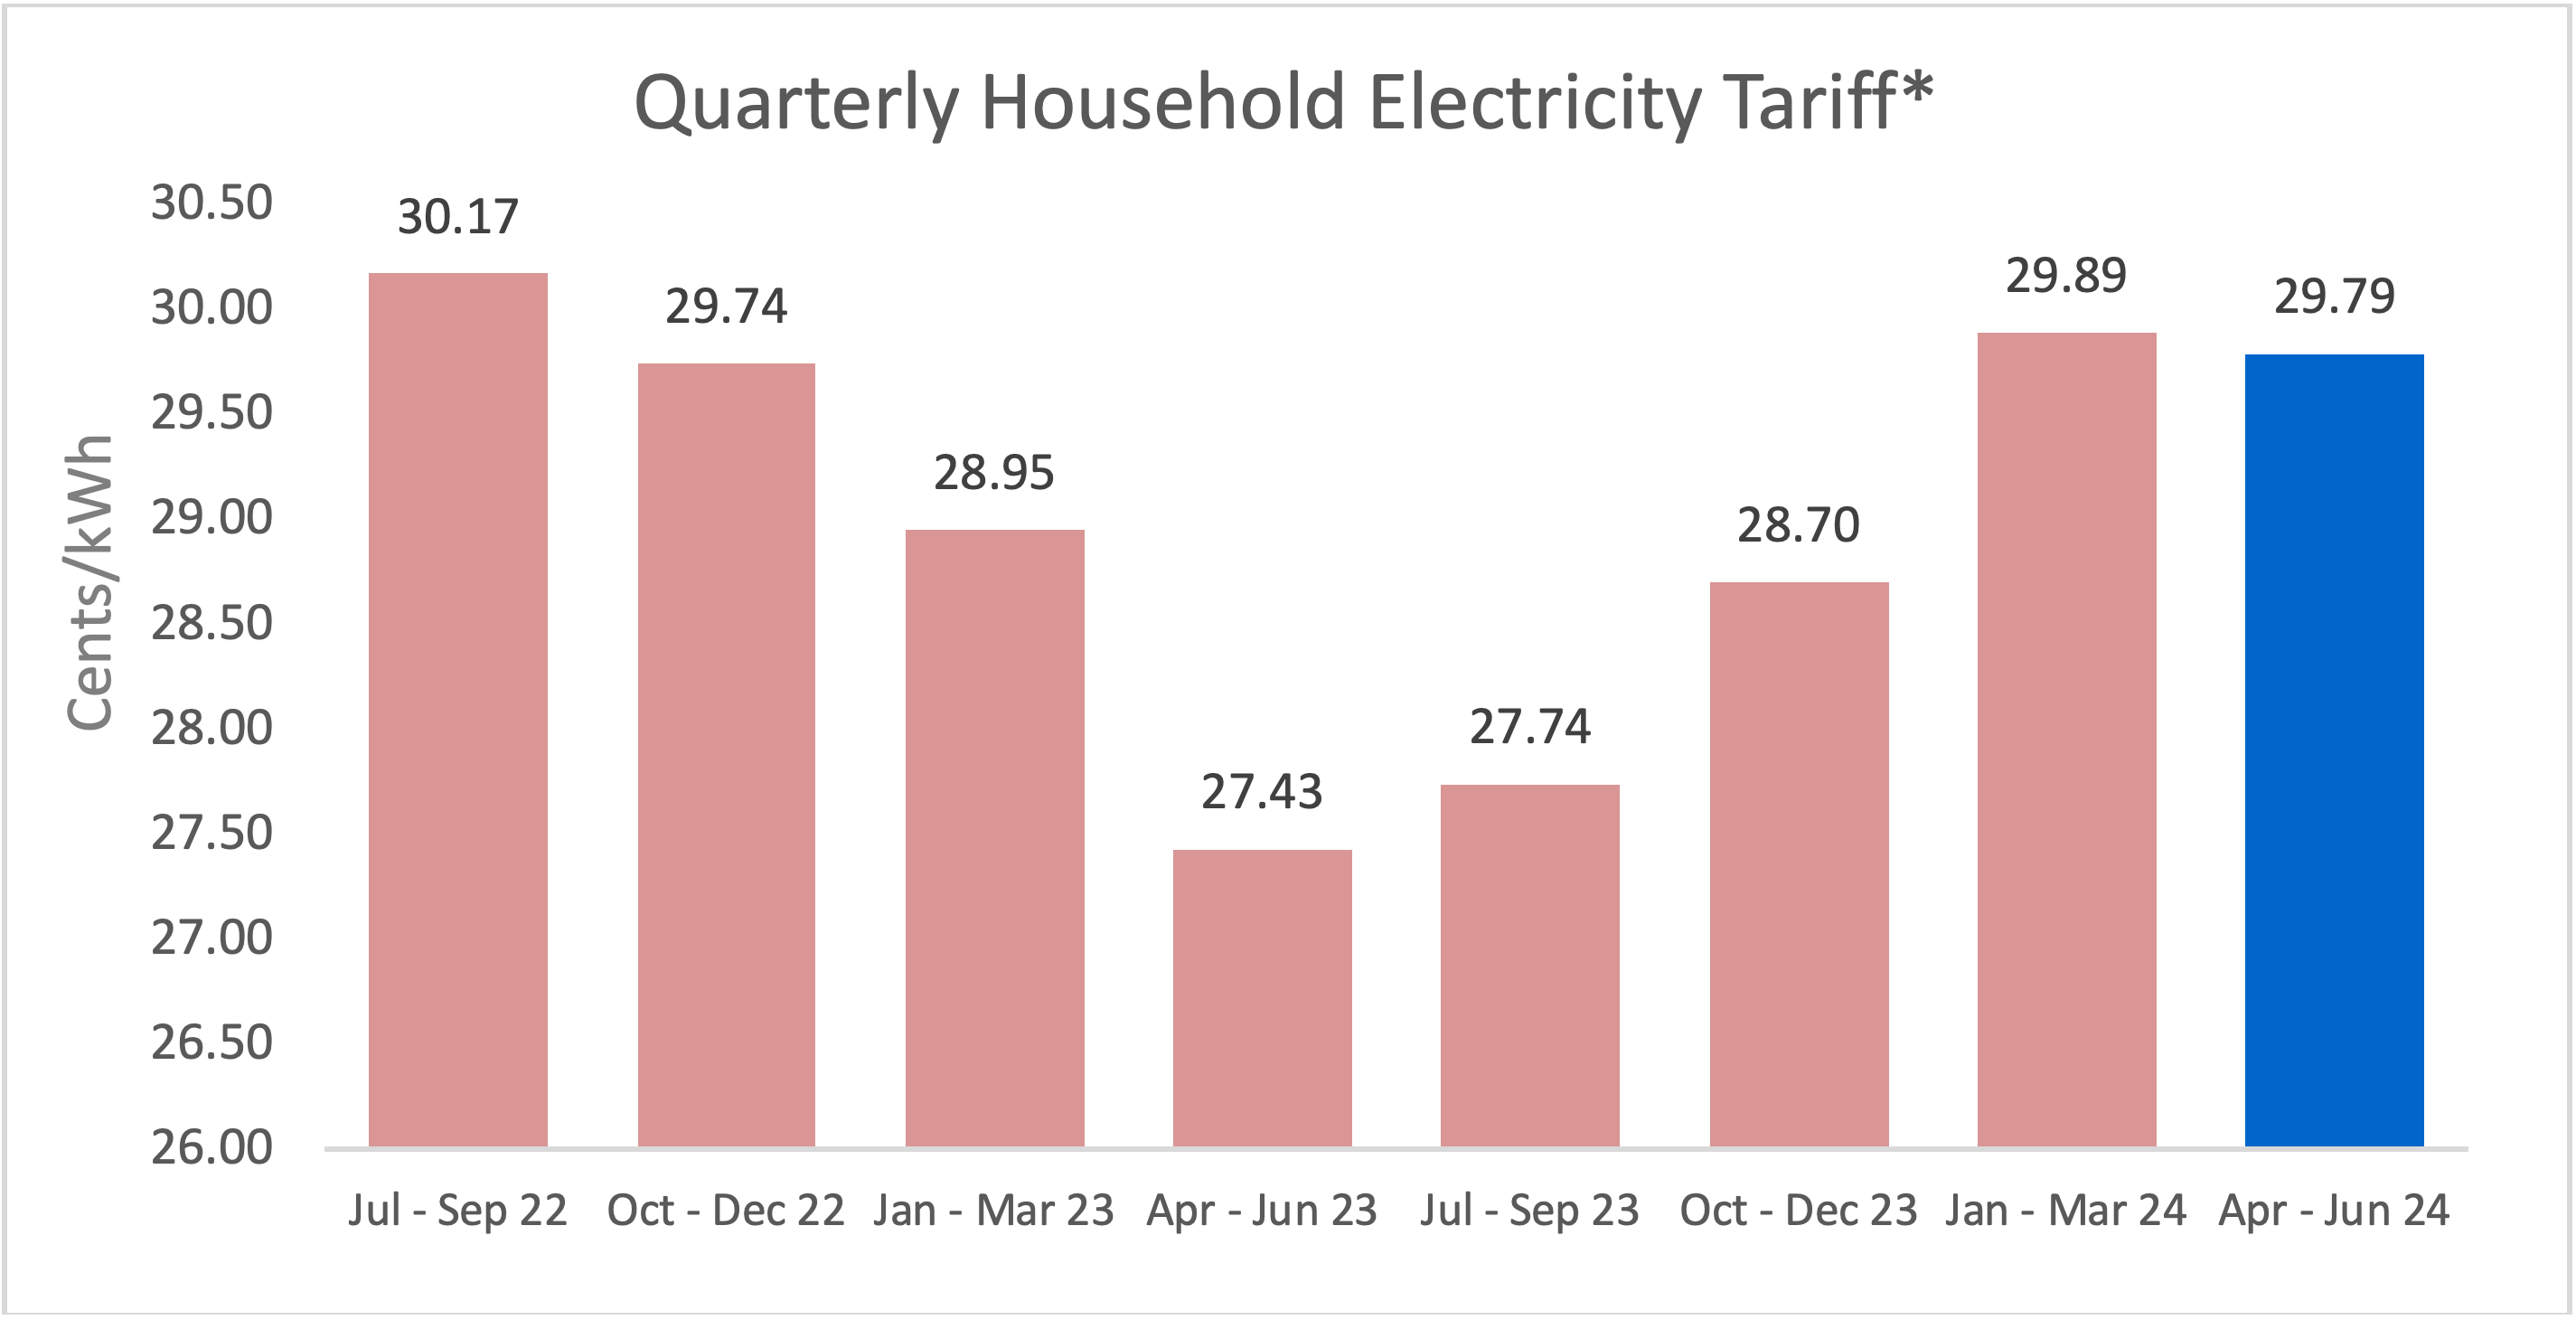 Quarterly Household Electricity Tariff for the Period 1 April to 30 June 2024